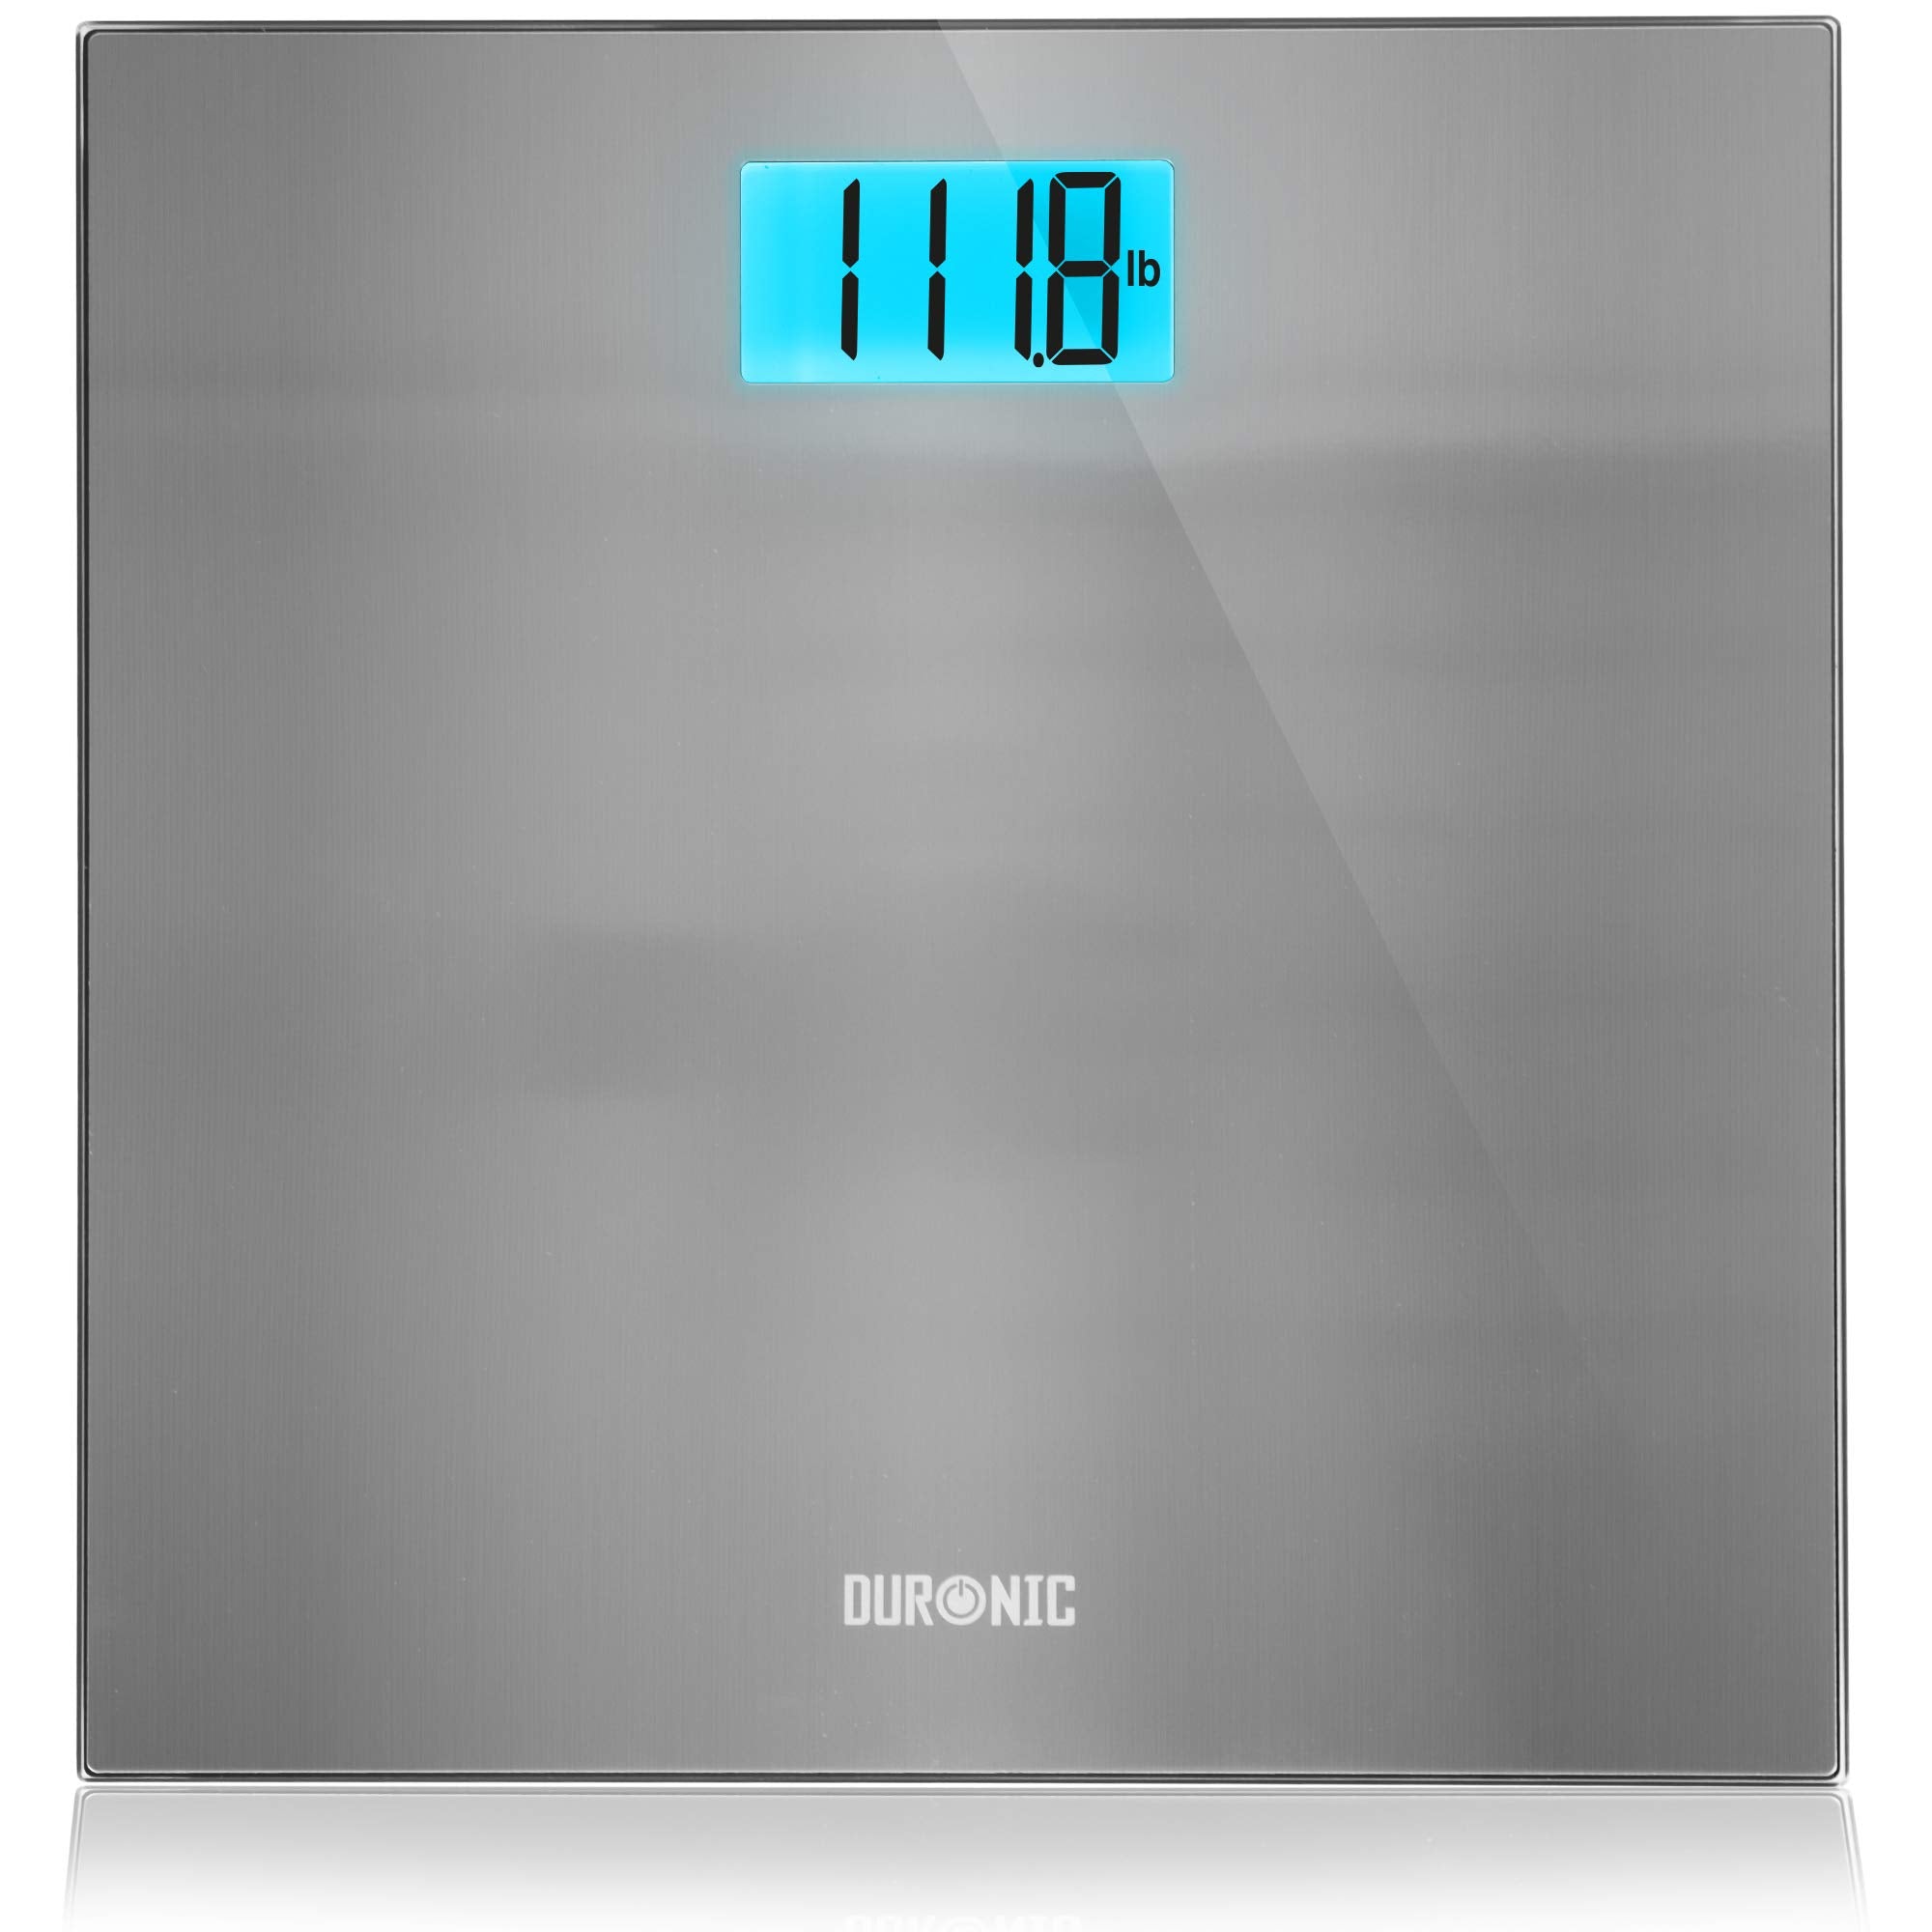 Duronic Digital Bathroom Body Scales BS103 | Measures Body Weight in Kilograms, Pounds and Stones | Stainless-Steel Design | Step-On Activation | Precision Sensors | 180kg Capacity…